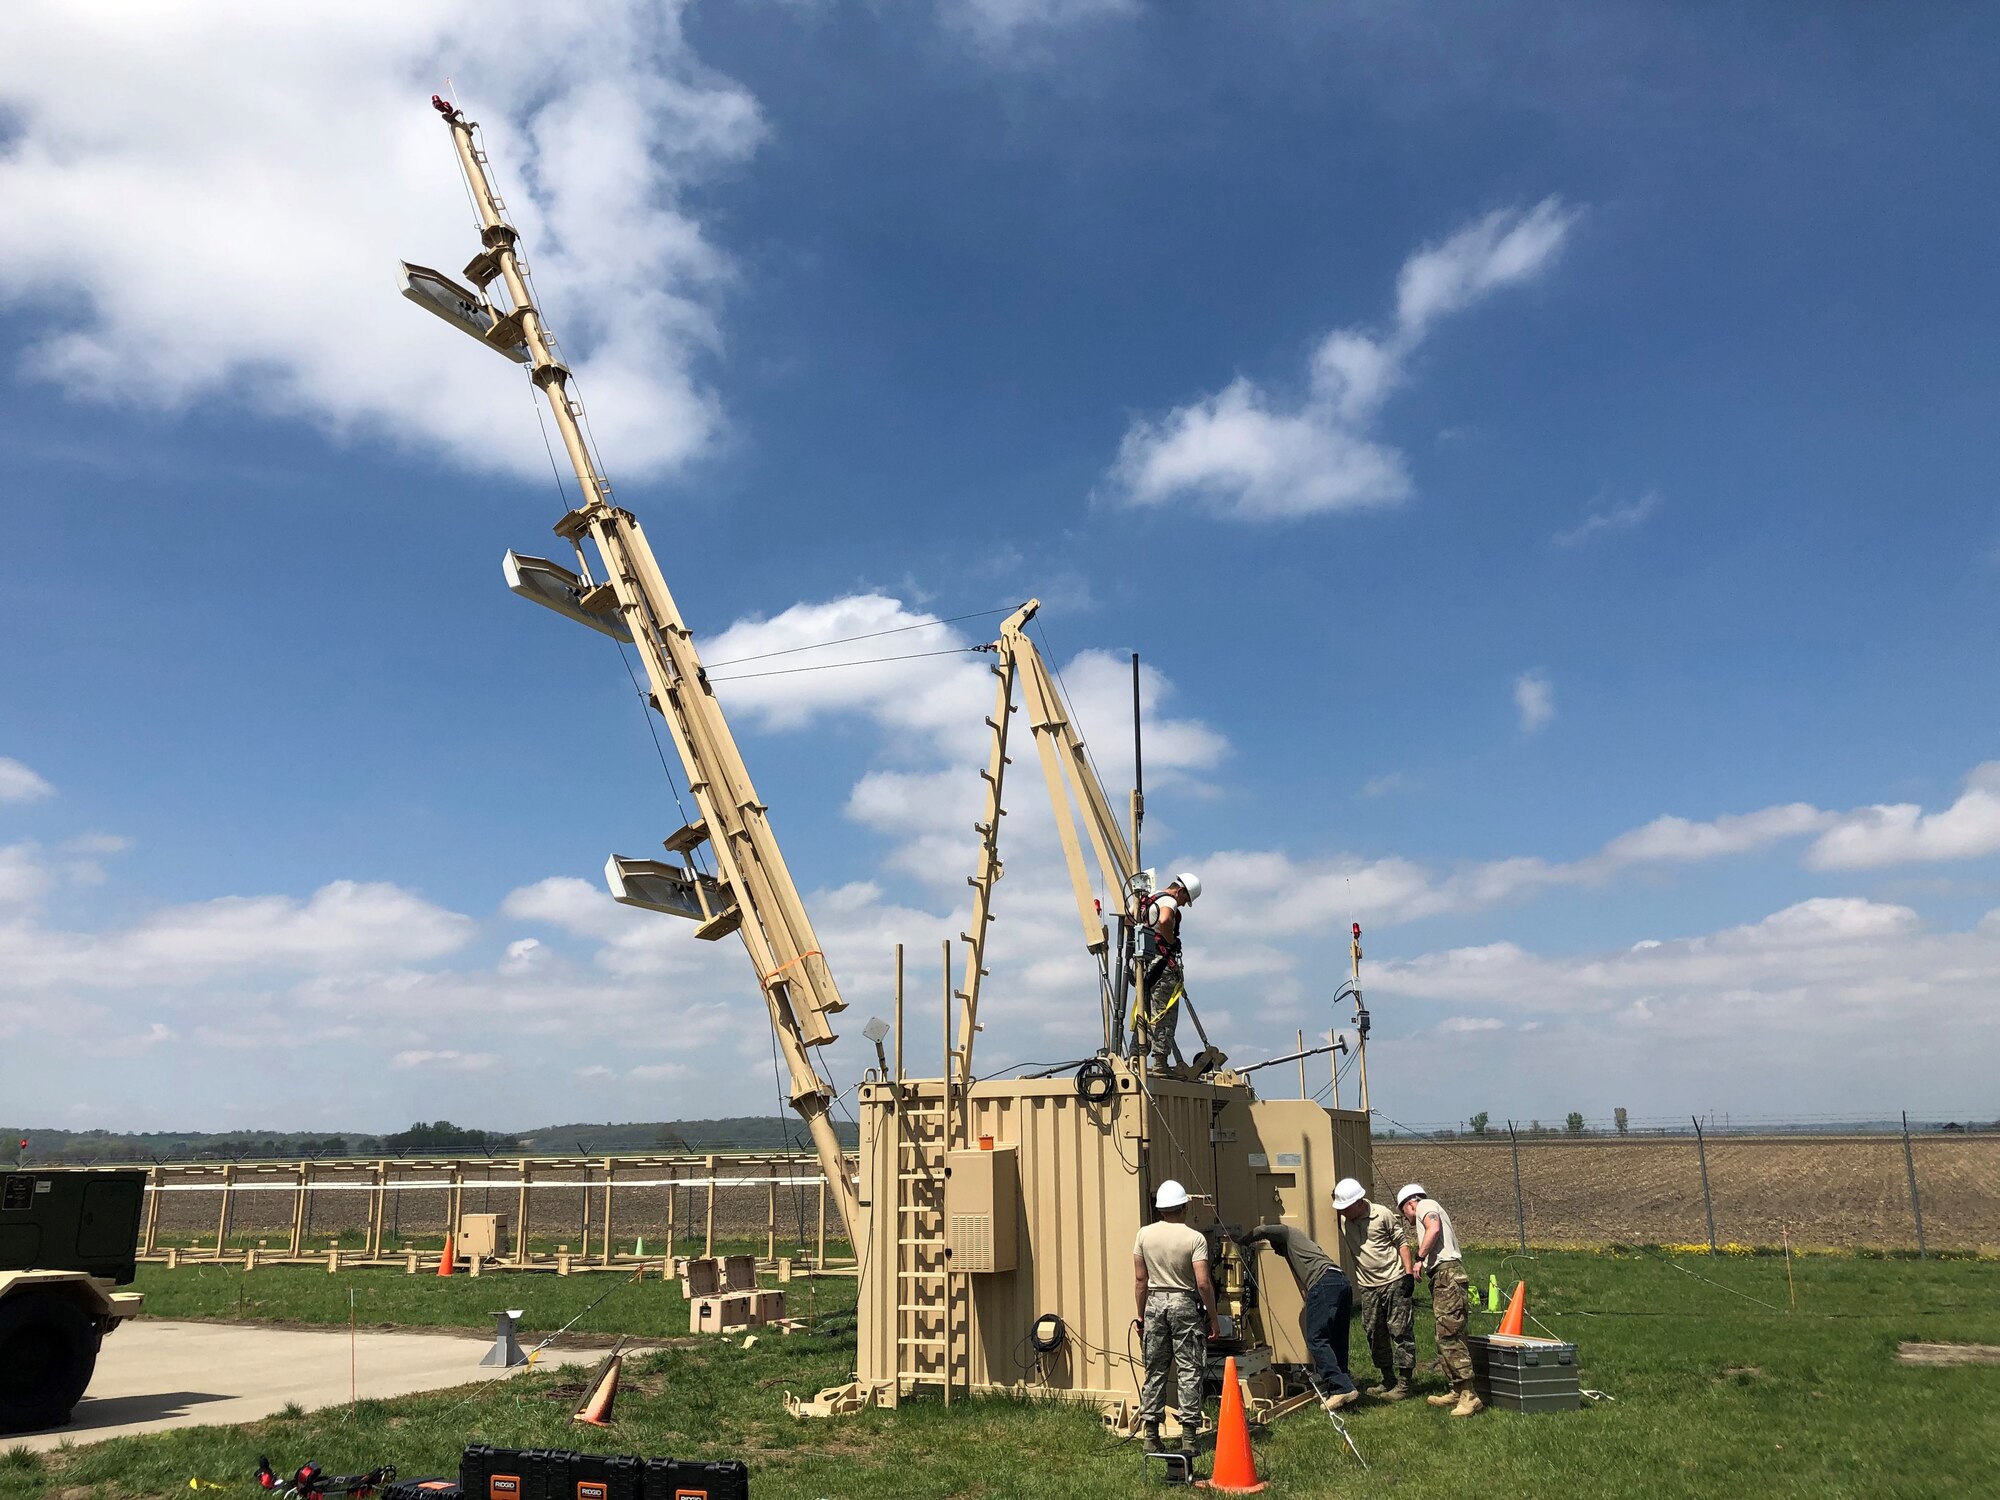 Members of the 53rd and 270th Air Traffic Control Squadrons participate in hands-on Deployable Instrument Landing Systems training at Rosecrans Air National Guard Base in St Joseph, Mo., in early 2019. The D-ILS vastly improves warfighter’s abilities to land in austere environments and low-visibility conditions. (Courtesy photo)